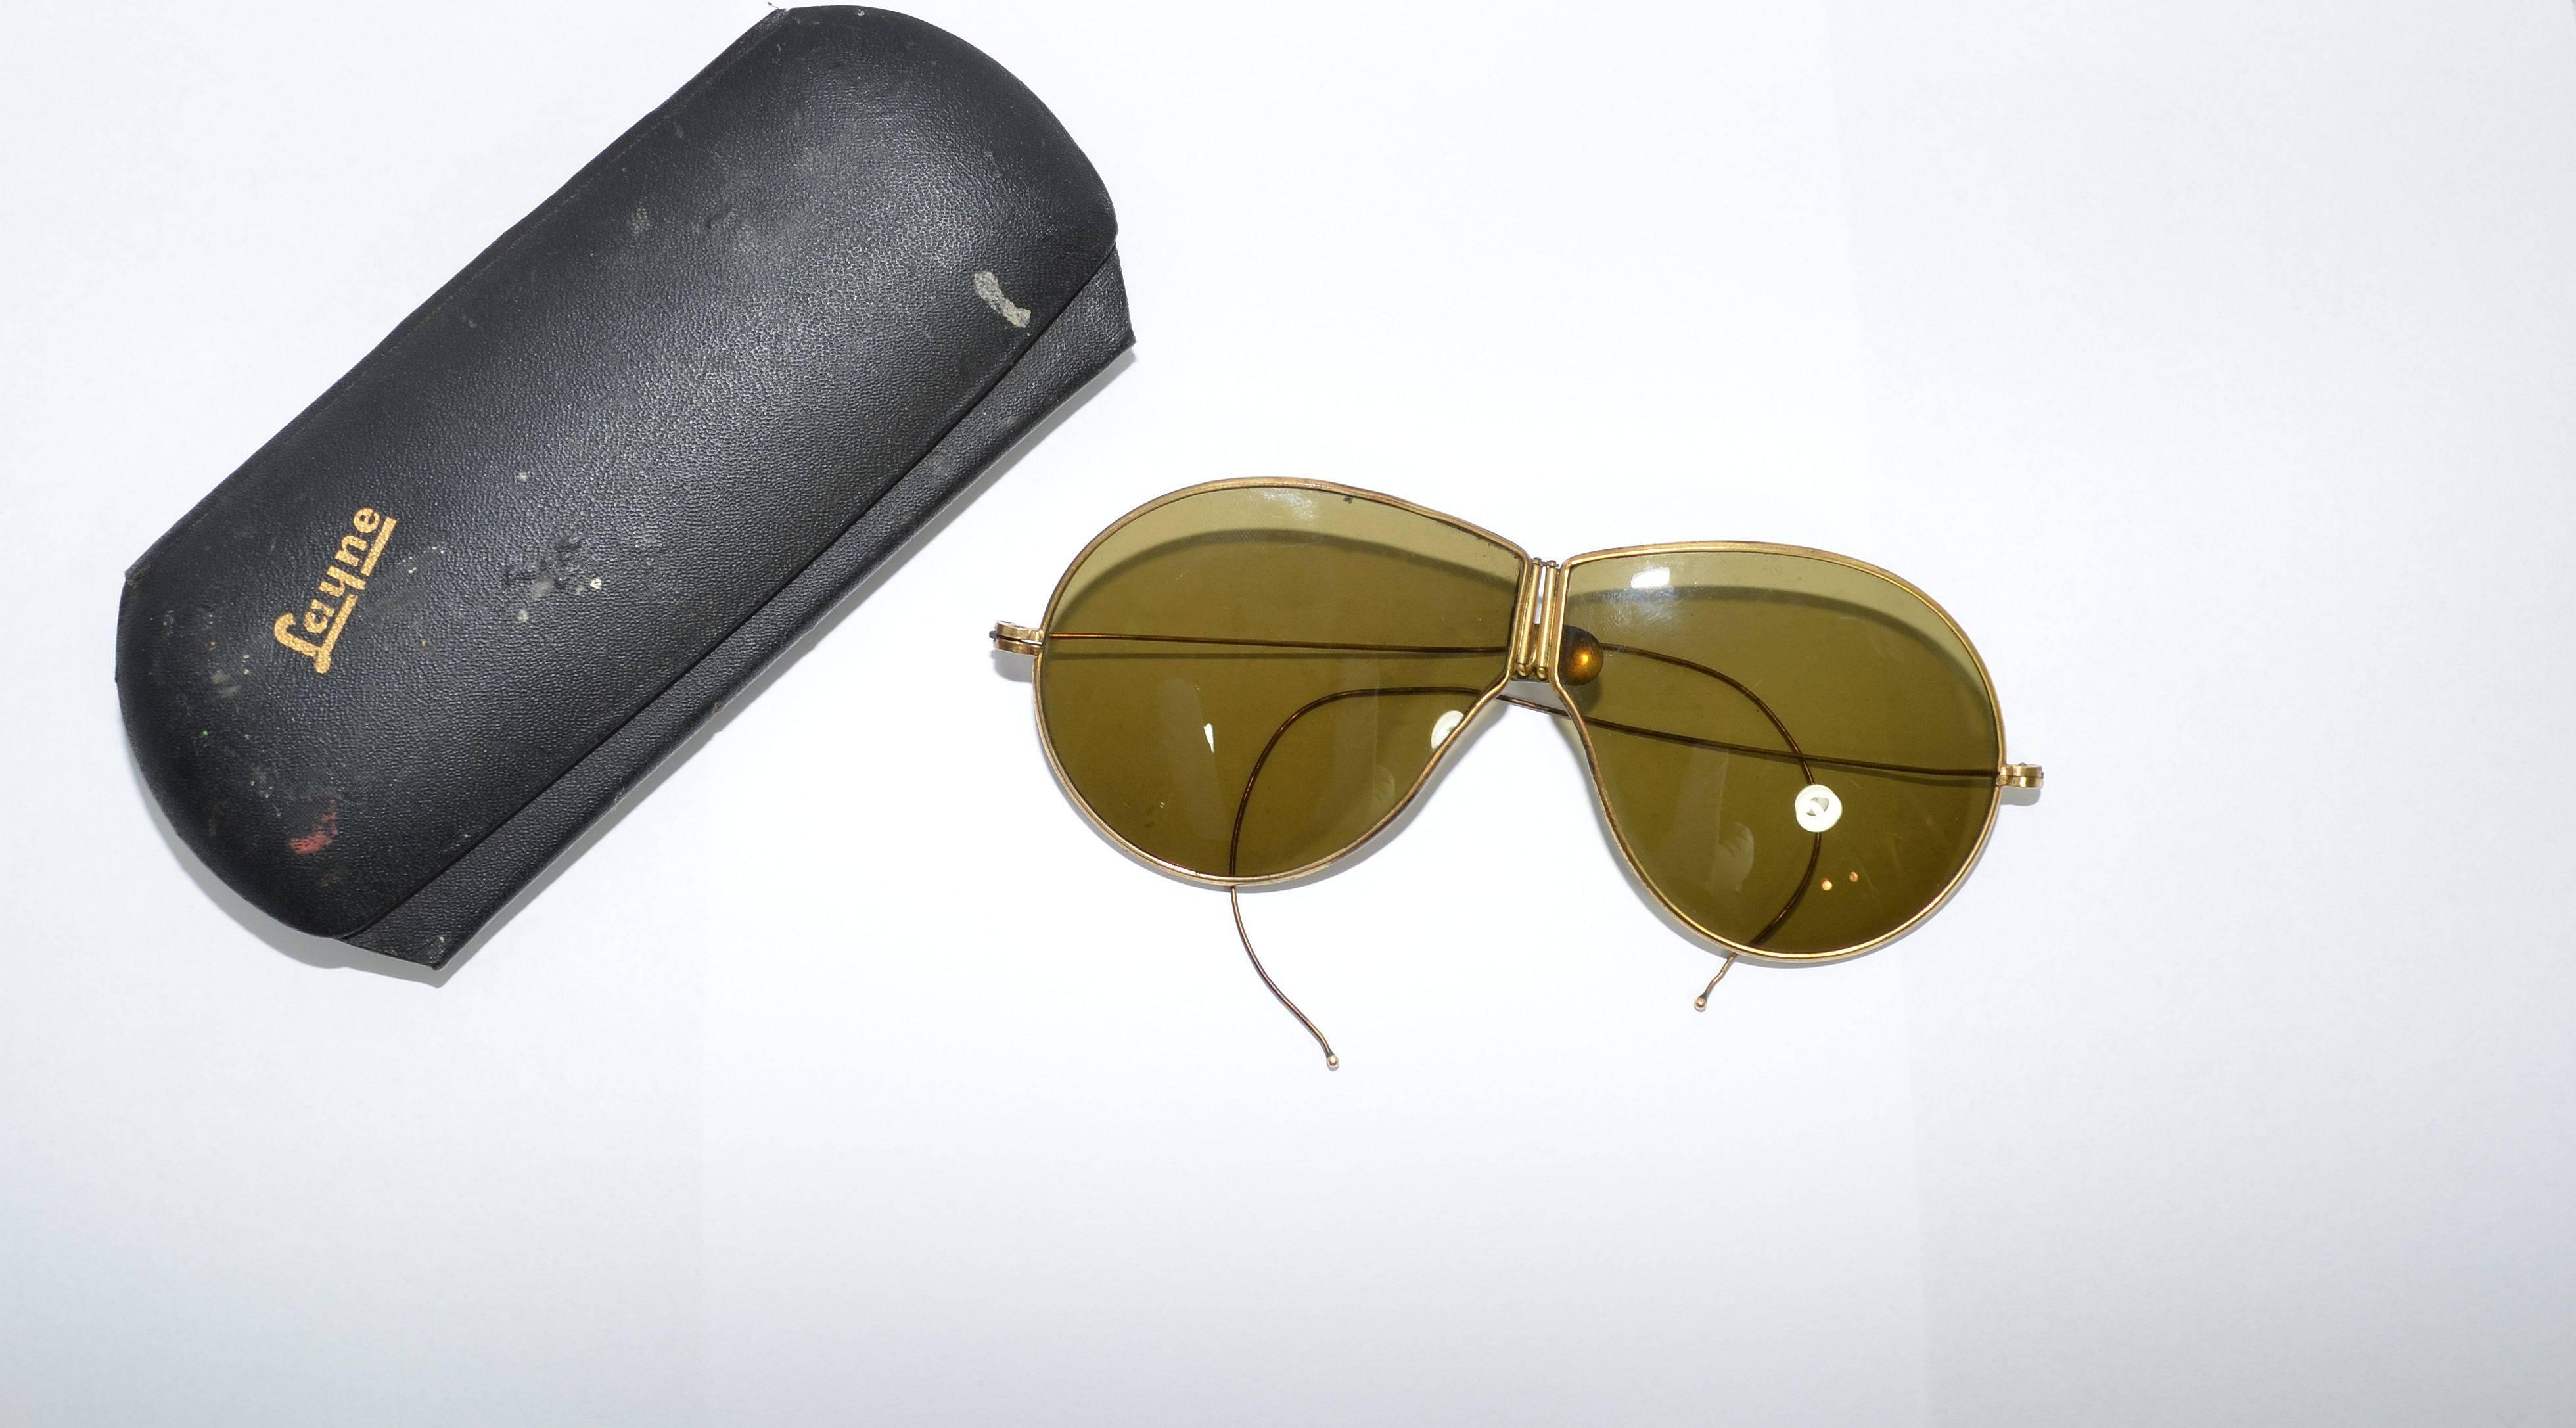 Vintage folding aviator sunglasses with olive-colored flat lenses. These sunglasses fold up into the size of one lens when not in use, and have an antique gold metal frame that folds in the center and on the temples for easy storage. 

Temples